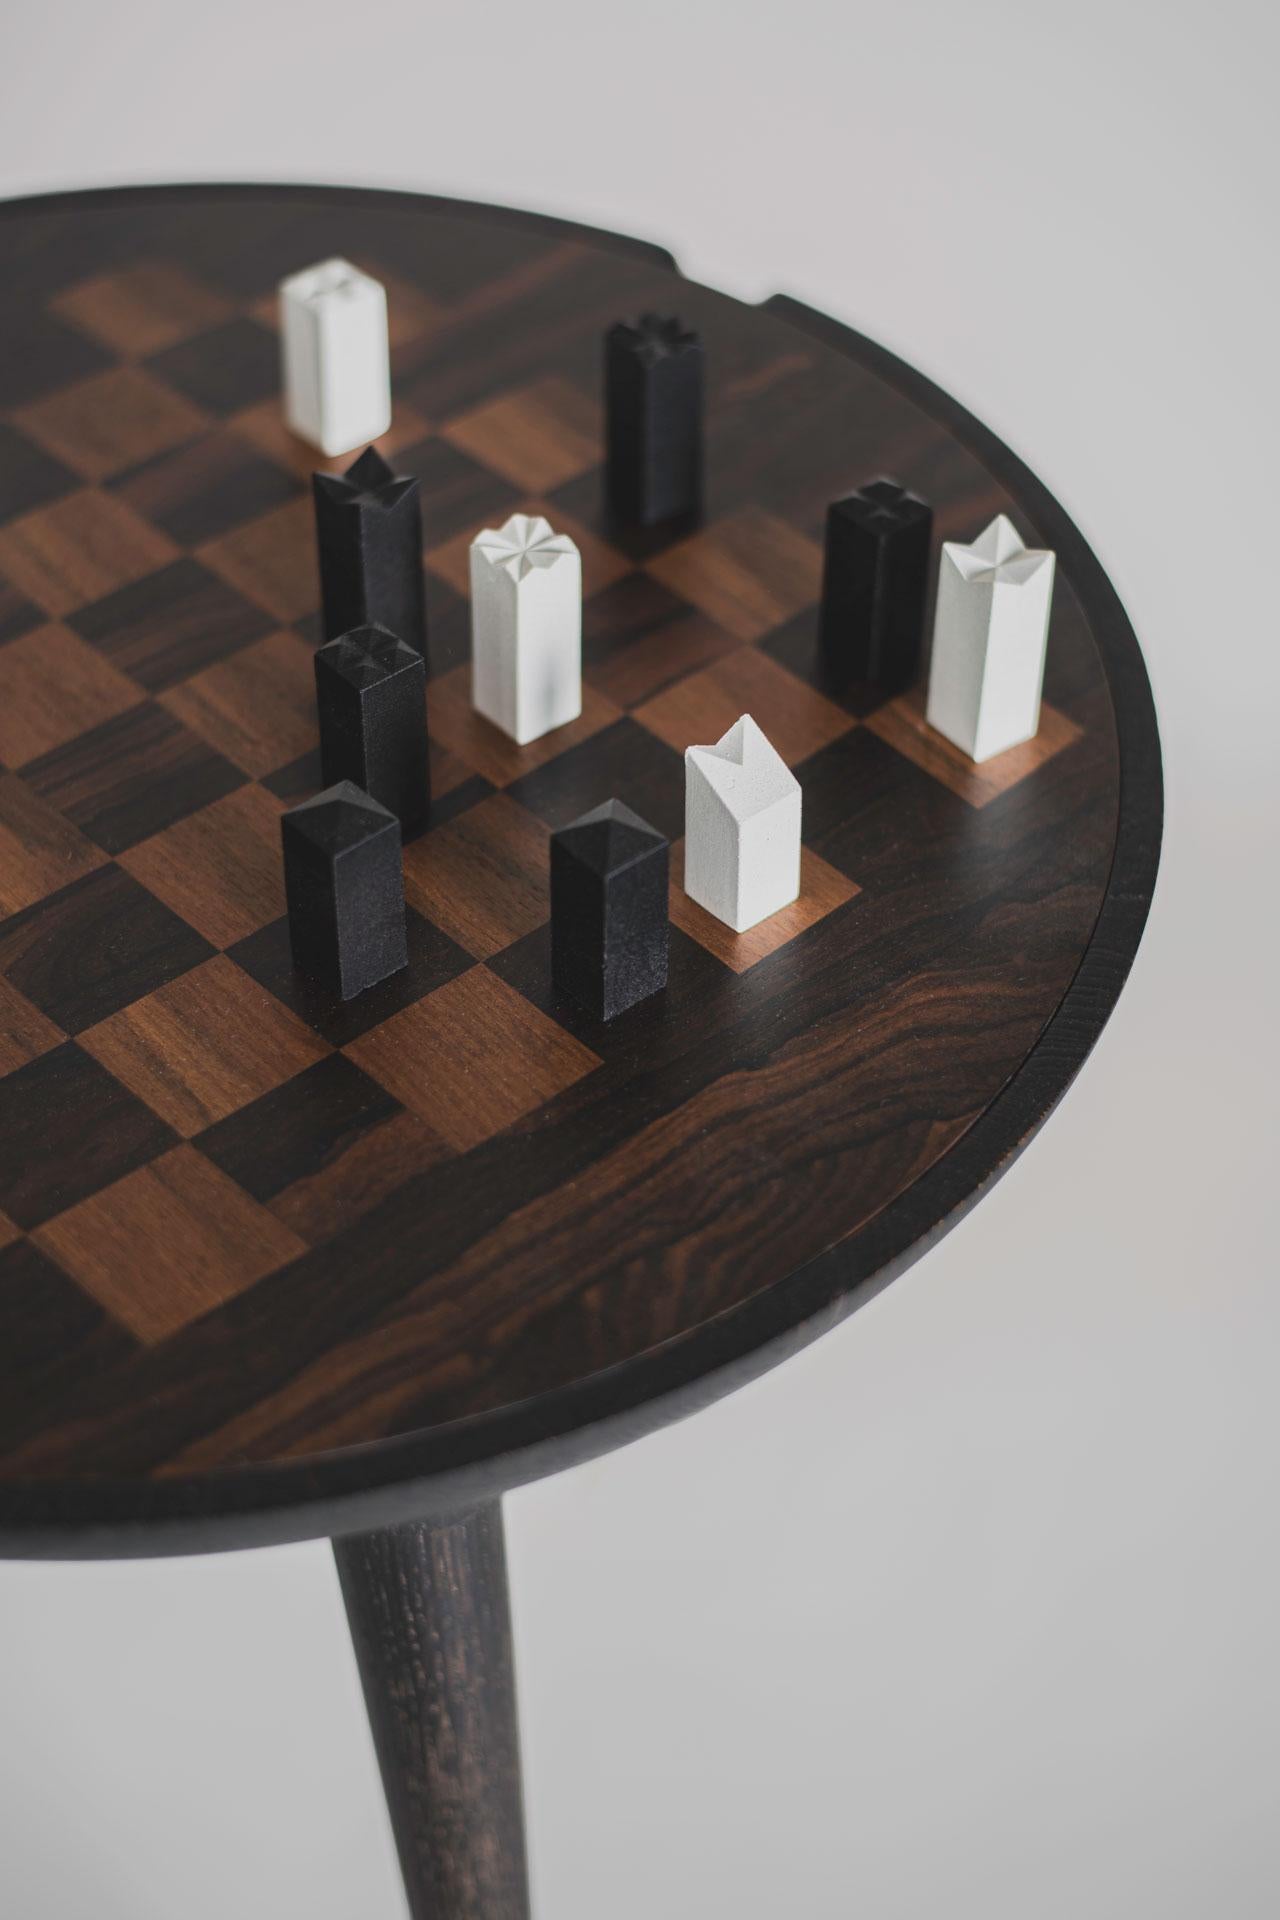 We've broadened our family of Trojan chess tables with a richly dark variant. The hue is achieved through a chemical reaction, so it doesn't rely on using a color pigment that might fade over time. Both the chessboard and the opposite side of the